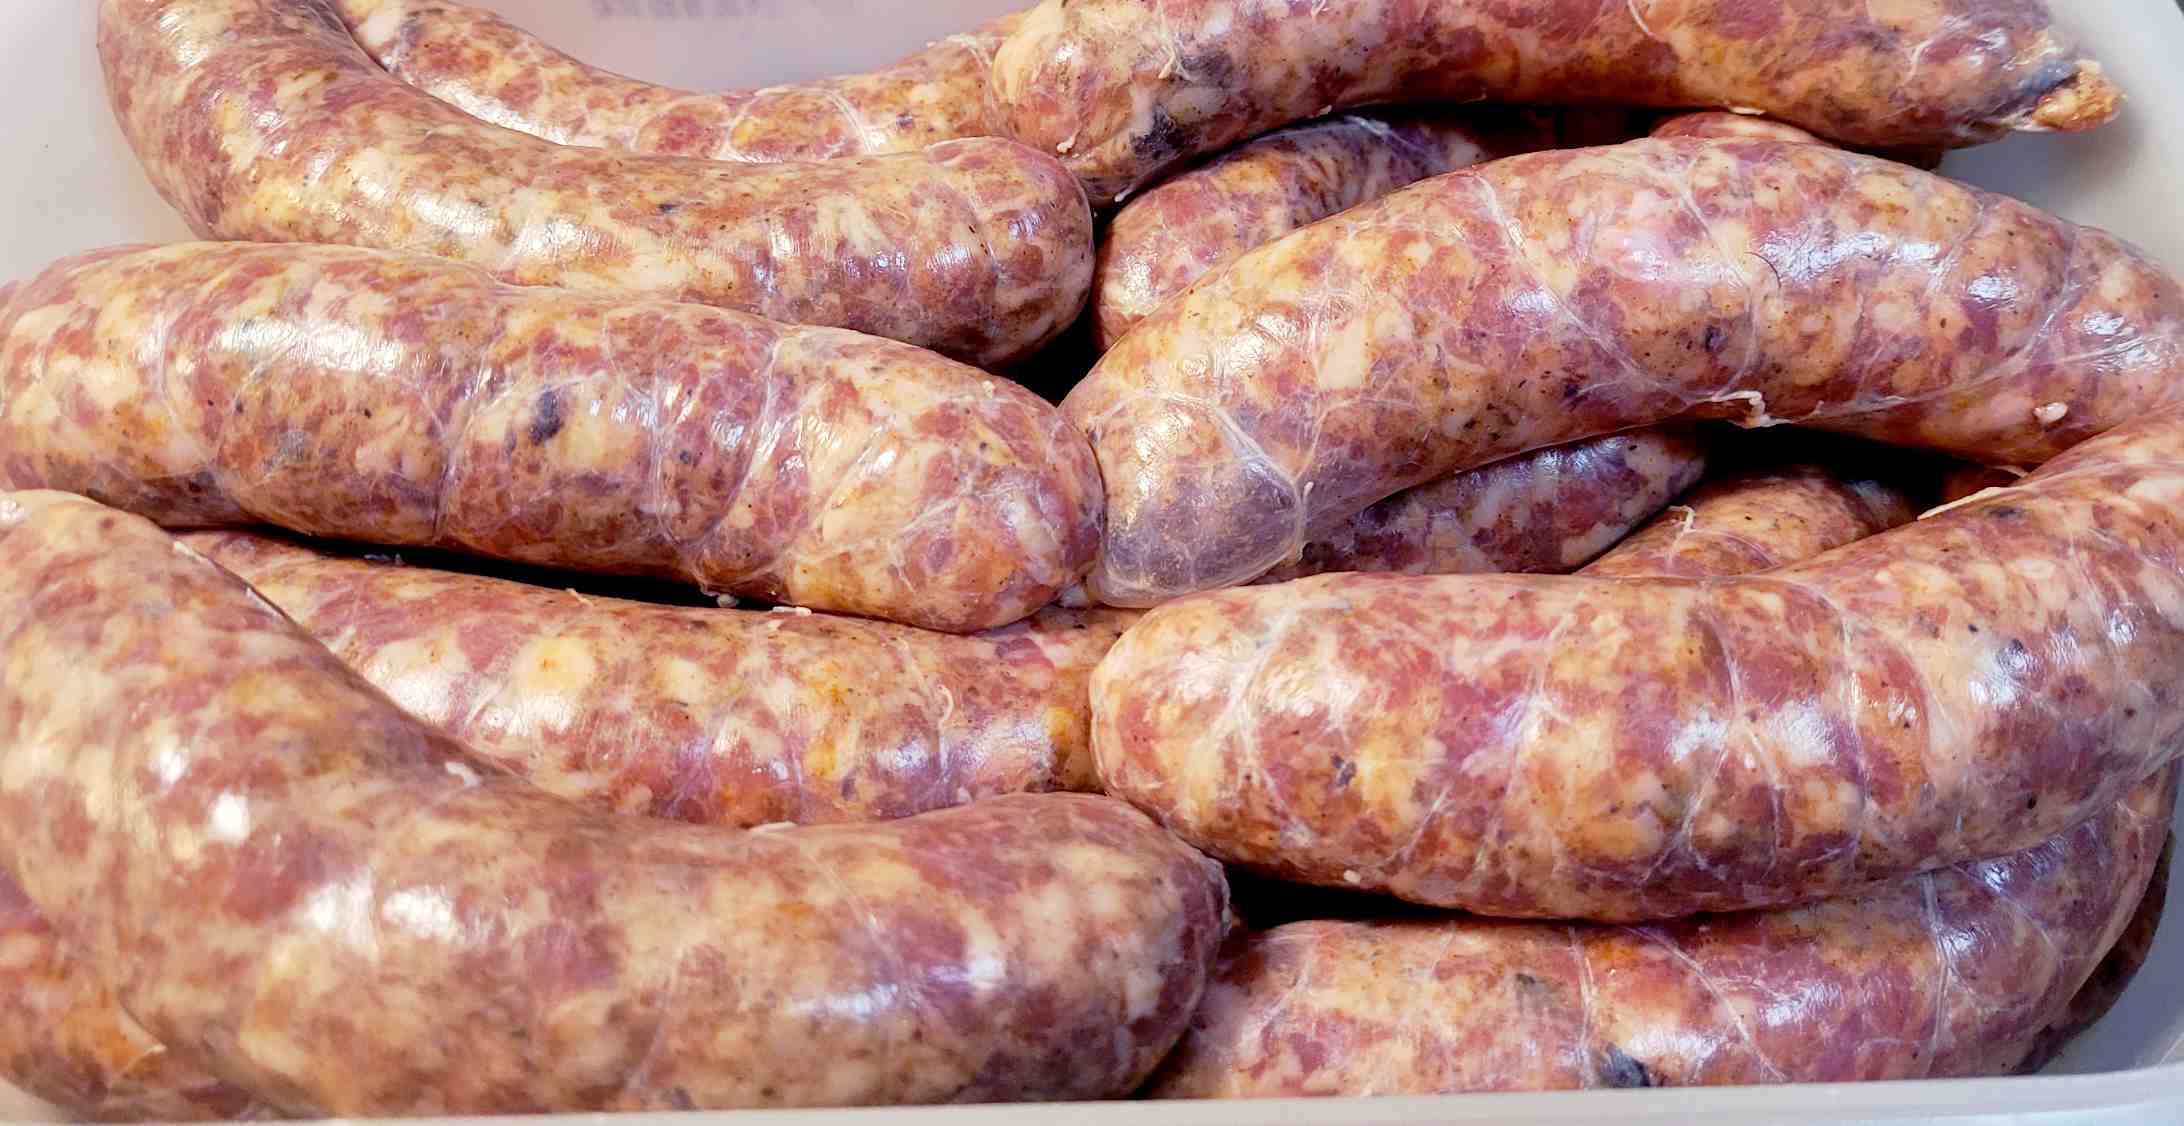 What is the difference between smoked sausage and kielbasa?